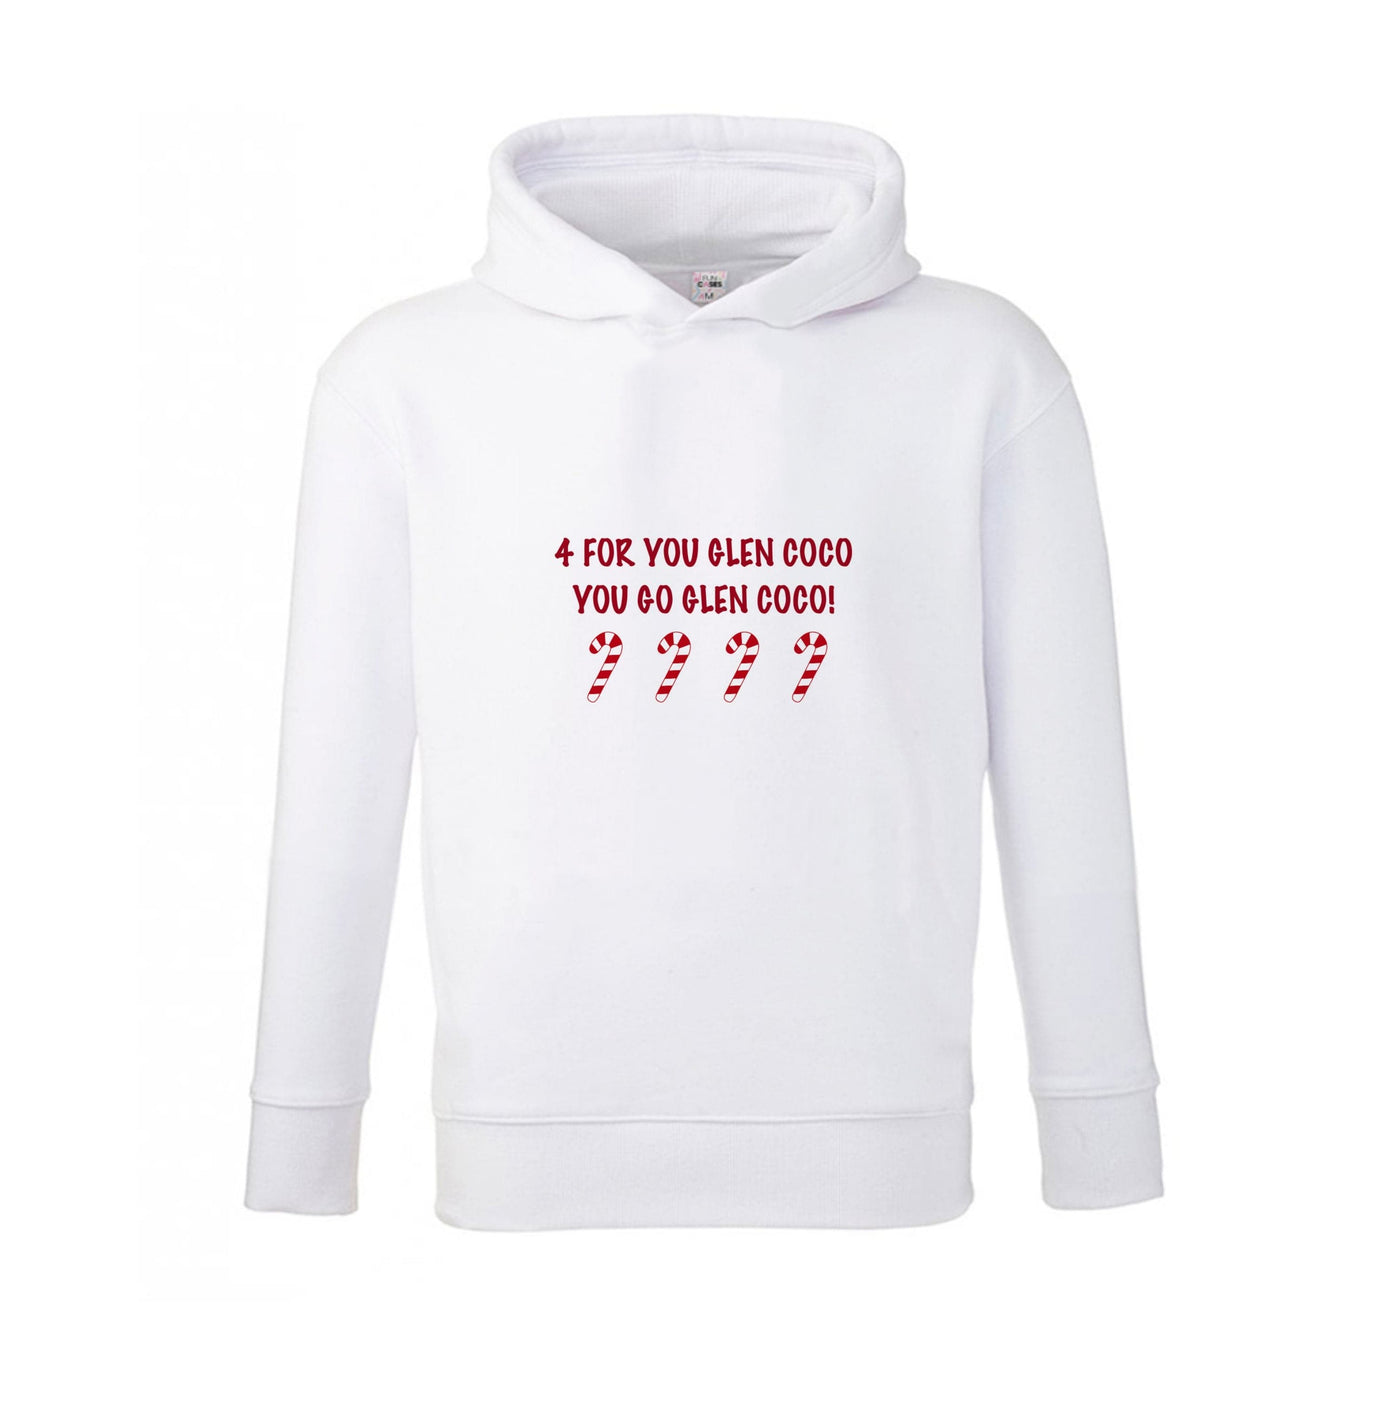 Four For You Glen Coco - Mean Girls Kids Hoodie